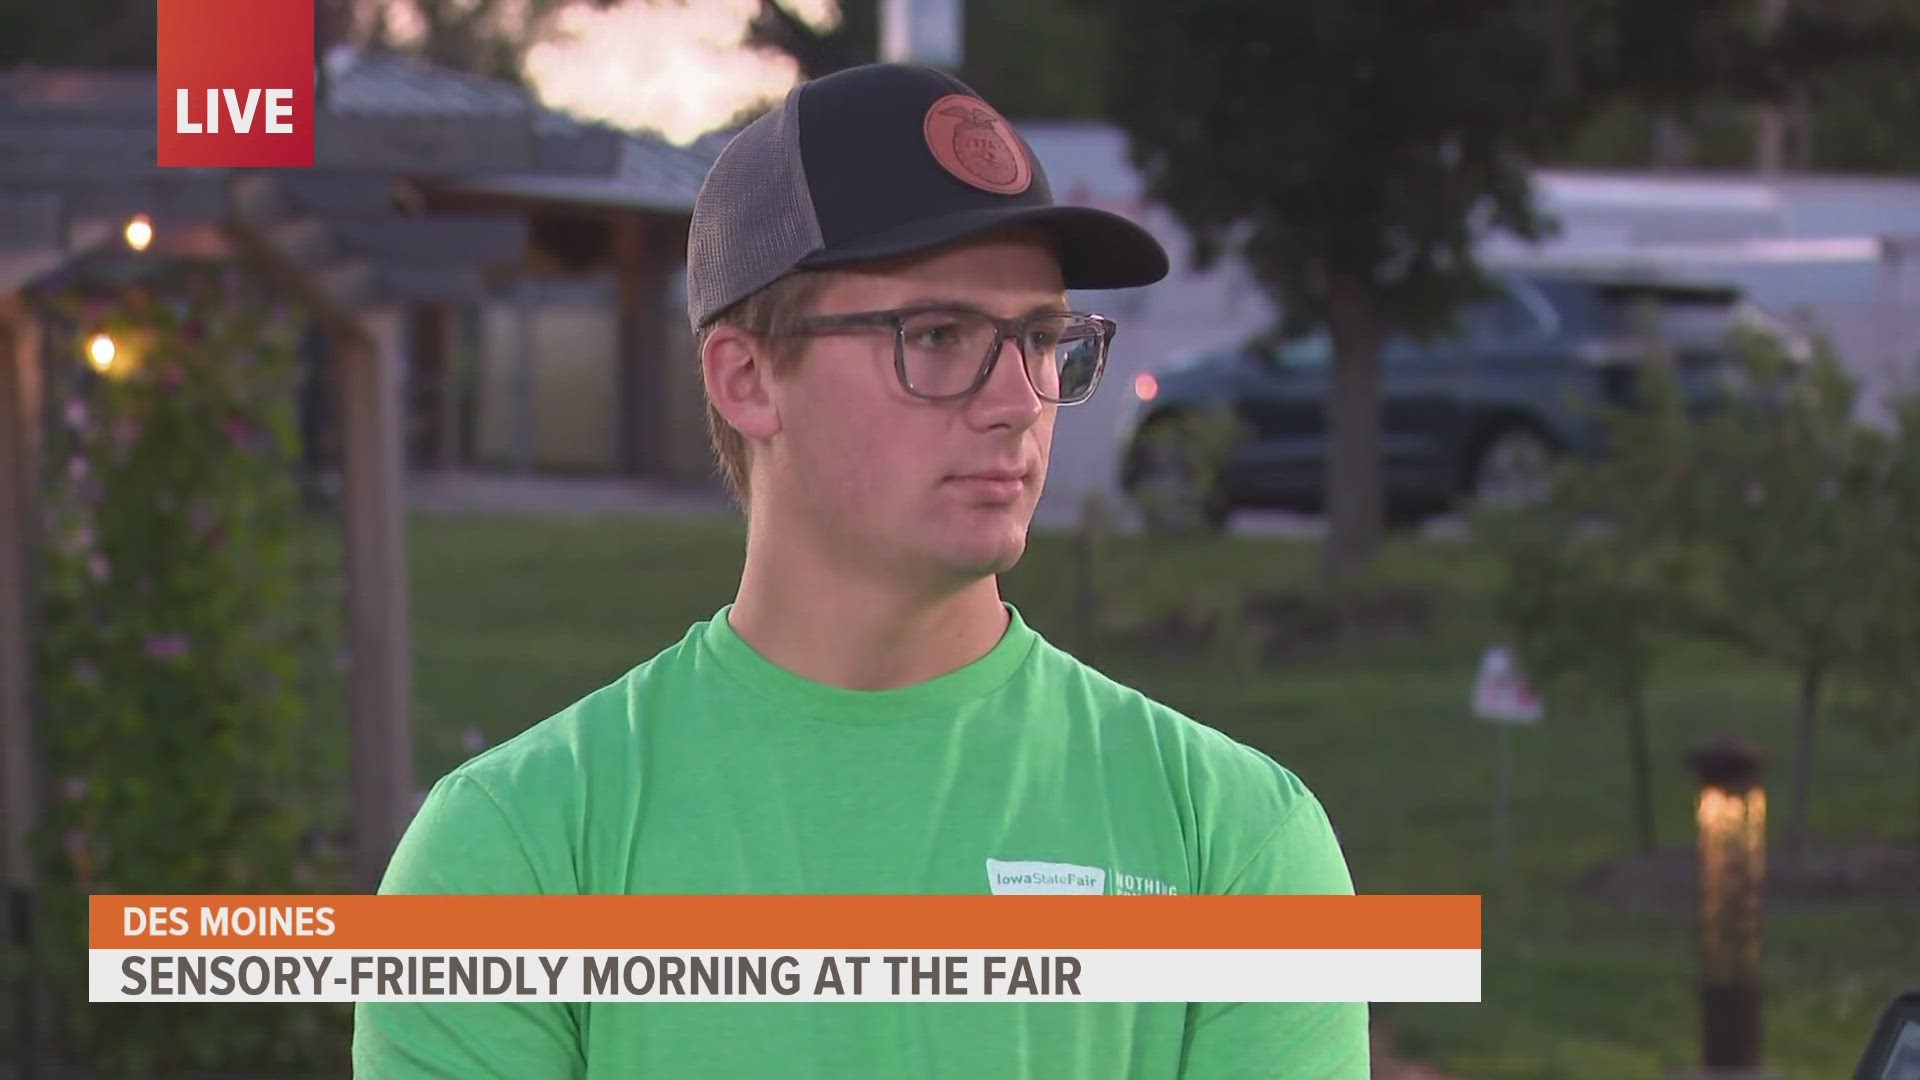 Brayden Parks, vice president of Bondurant FFA, discusses the importance of having a sensory-friendly morning at the fair.